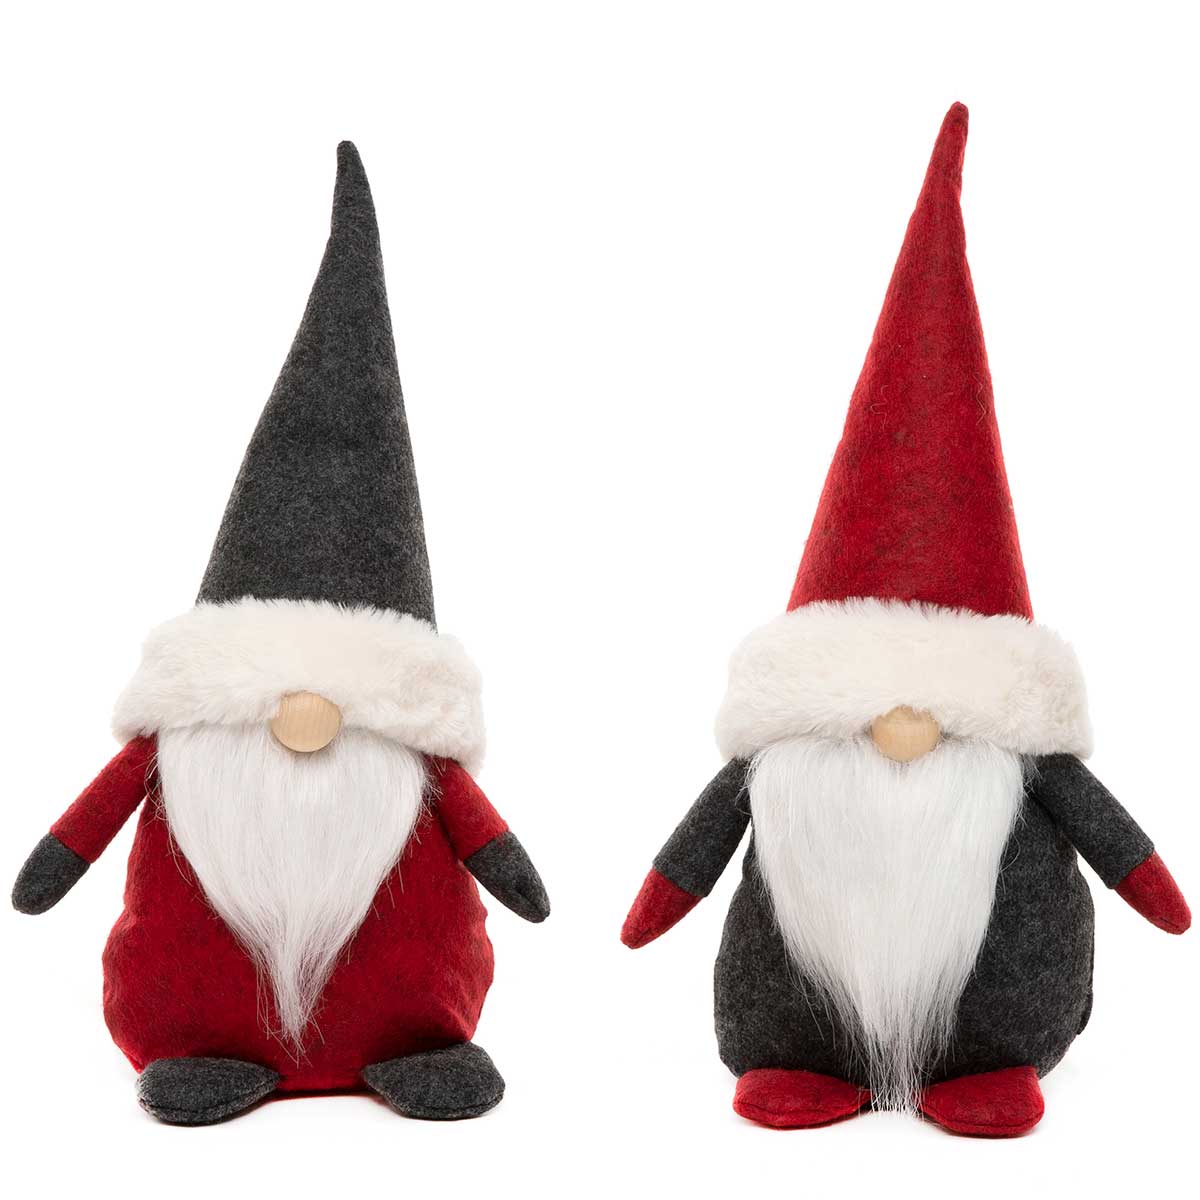 OLSEN BROTHERS GNOME RED/GREY 2 AST LARGE